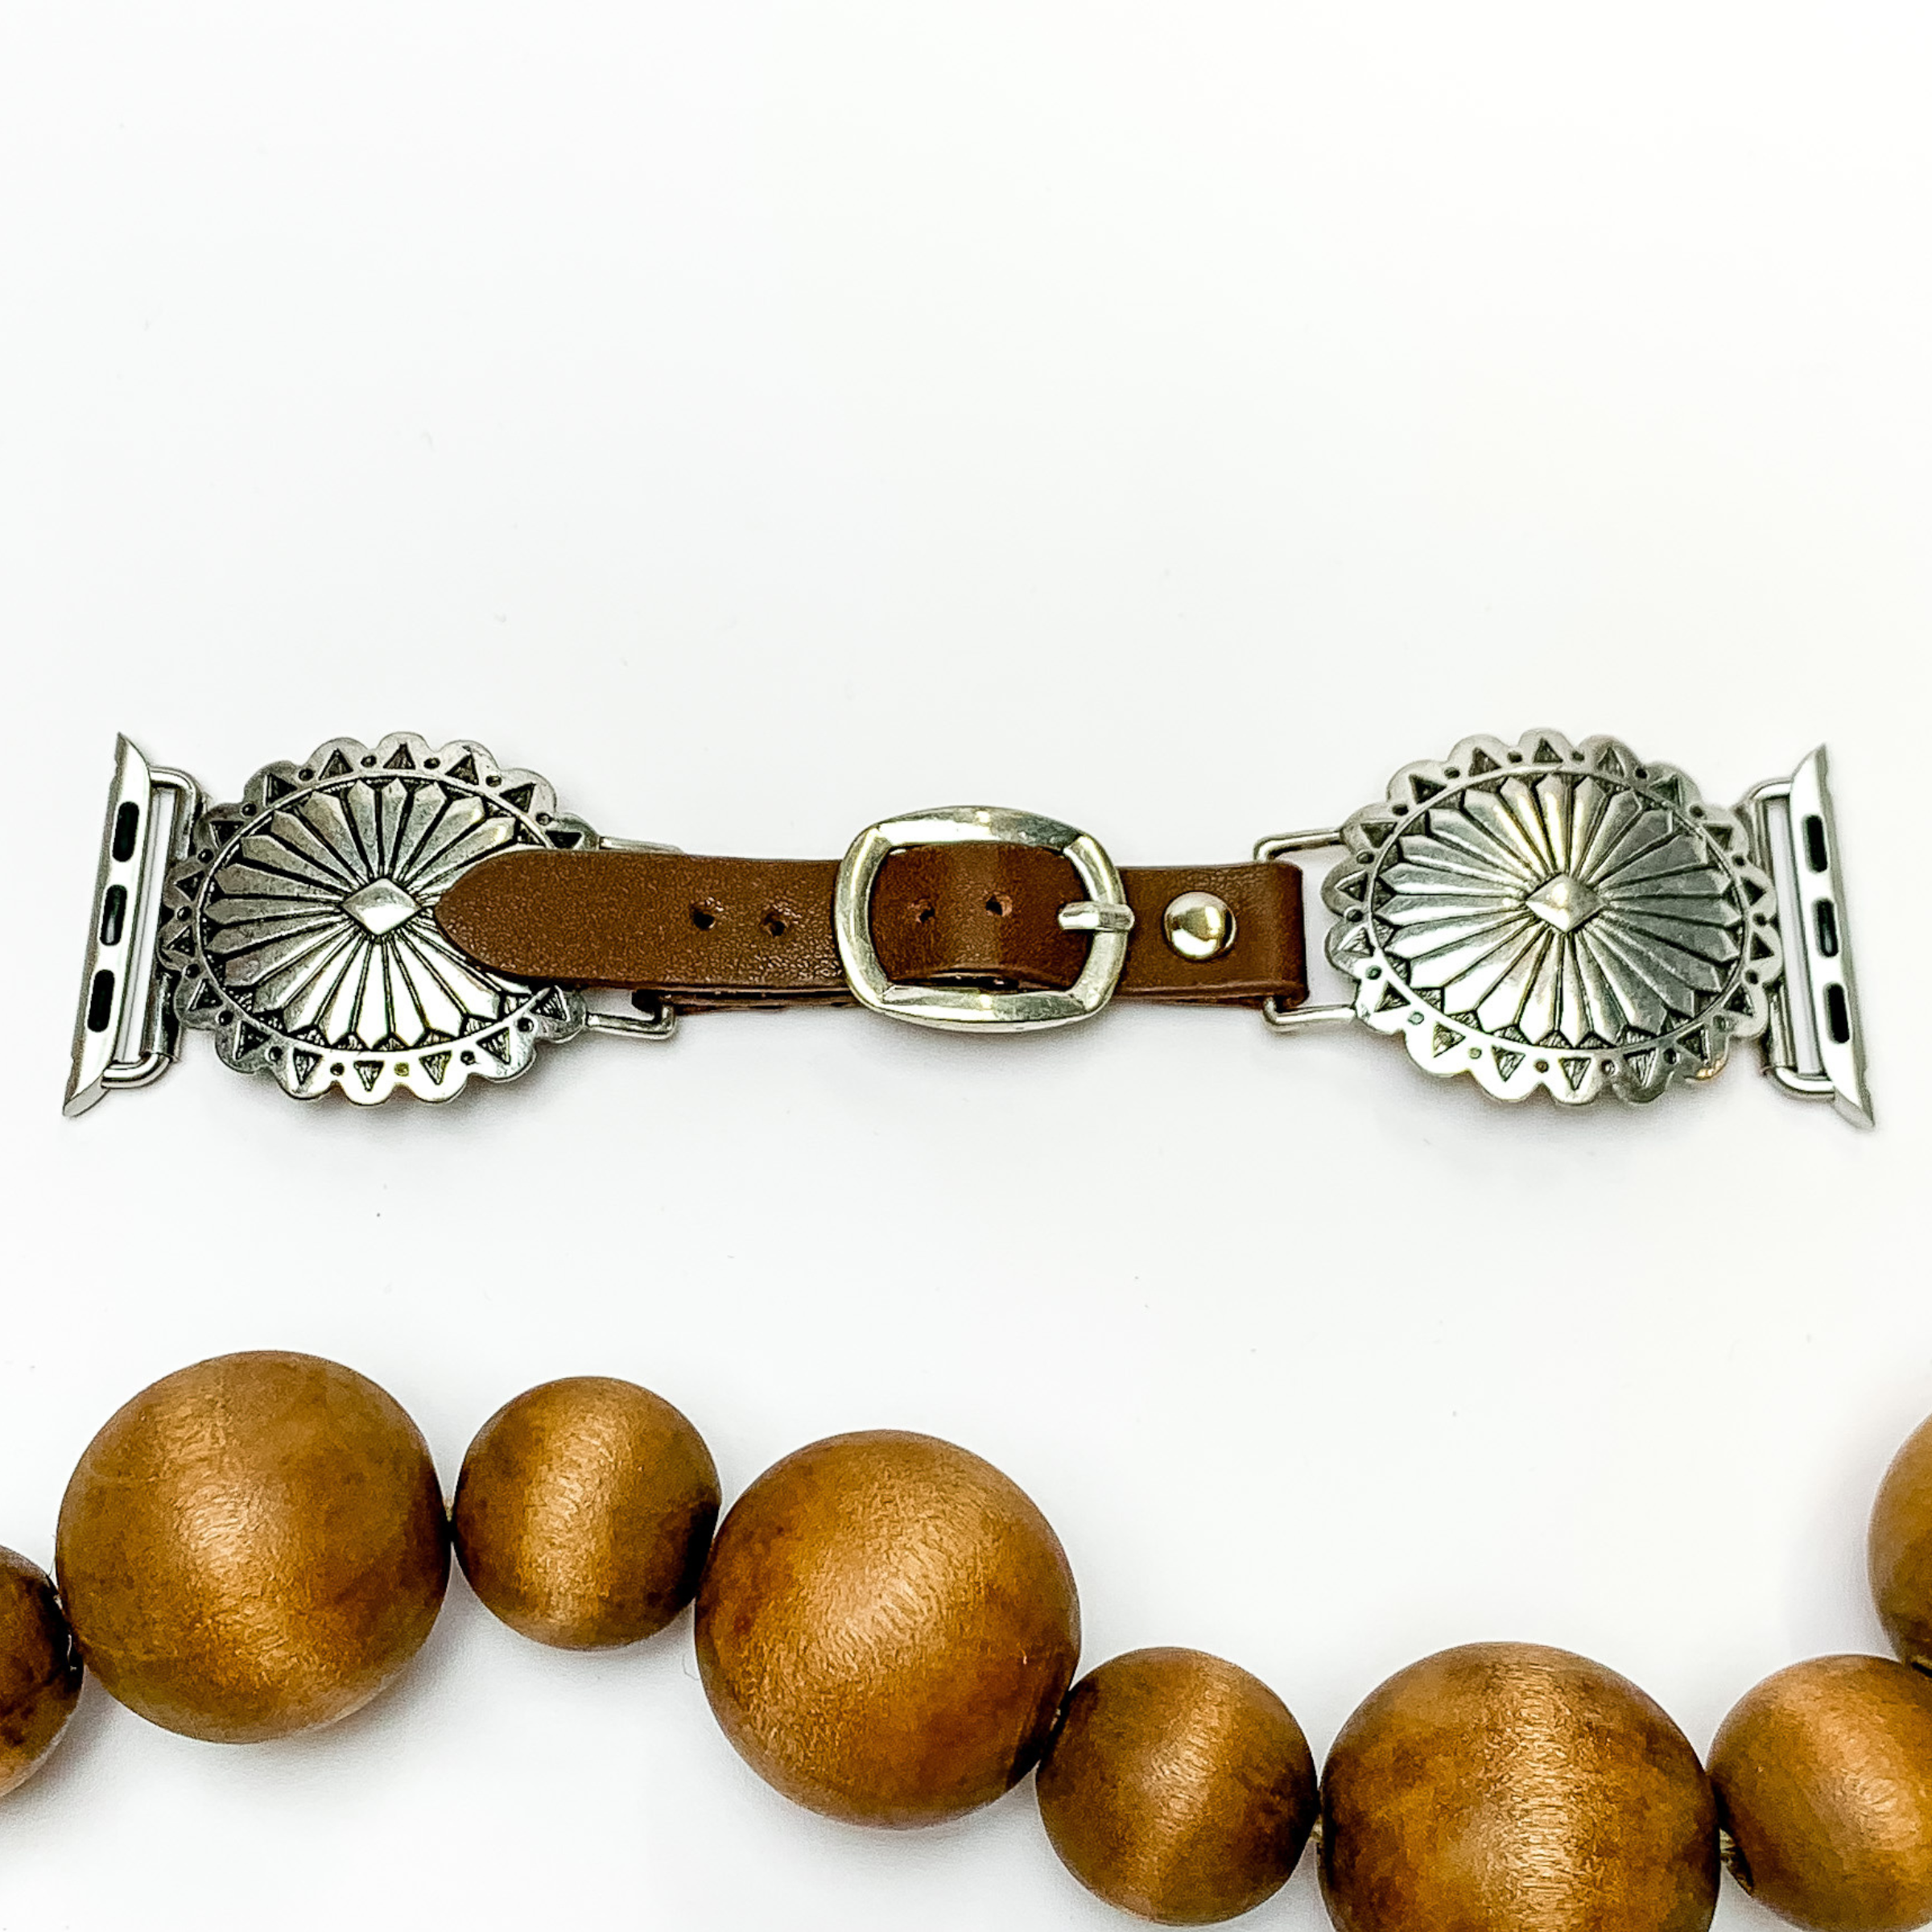 Dark Brown watch band with silver, oval concho ends with Apple watch band acessories. The conchos have engraved detailing. This watch band is pictured on a white background with brown beads underneath the band. 